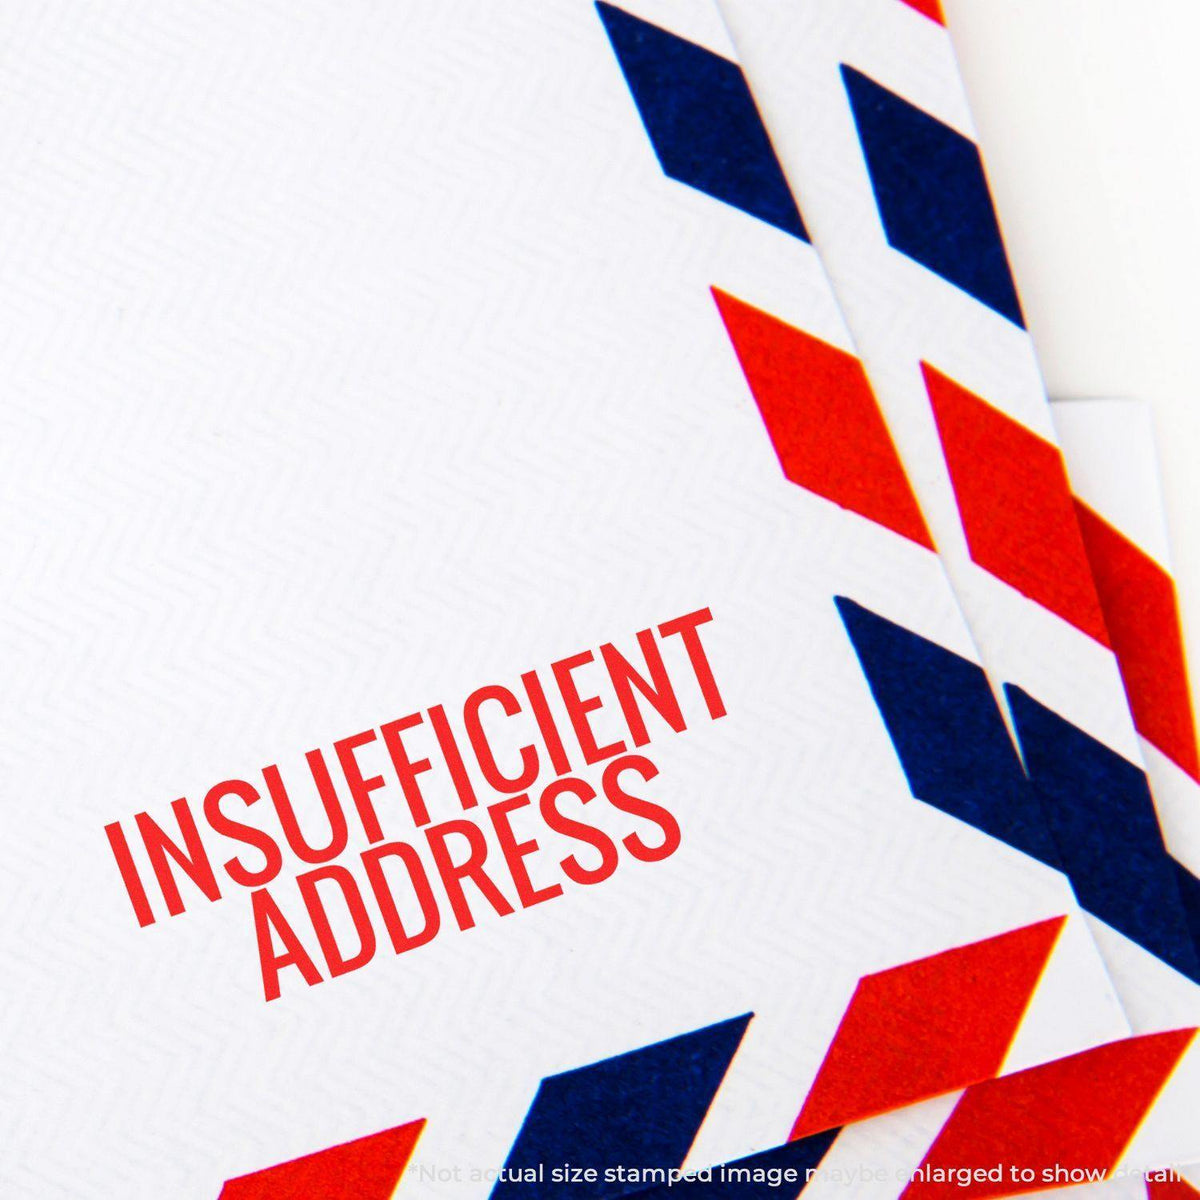 In Use Large Insufficient Address Rubber Stamp Image